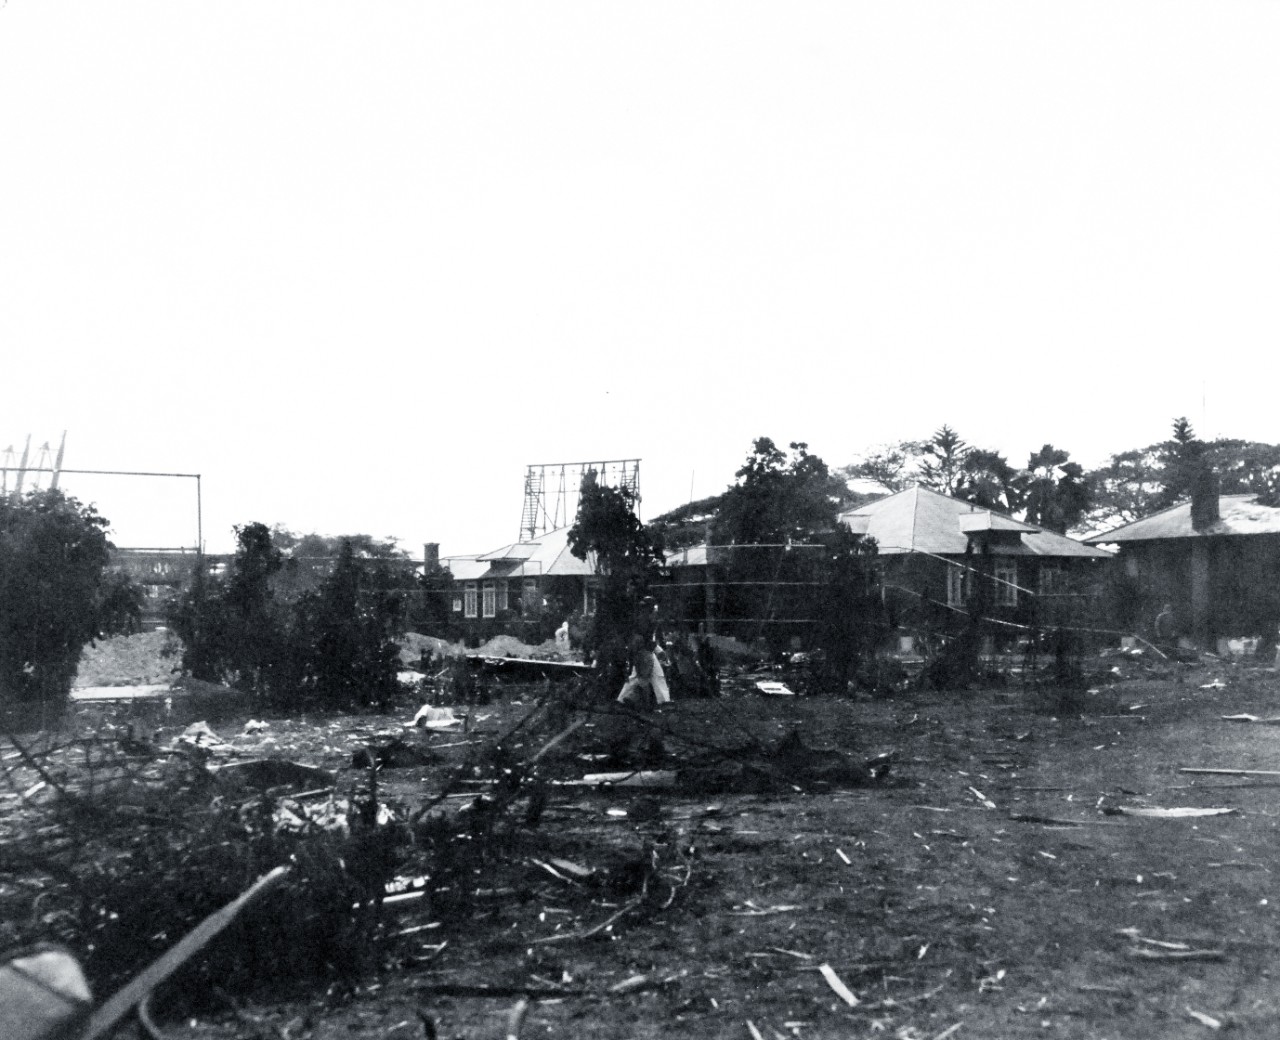 80-G-32510:  Pearl Harbor Attack, 7 December 1941.  Enemy plane wreckage, “Kate”, in Naval Hospital grounds. Official U.S. Navy photograph, now in the collections of the National Archives.   (9/15/15).